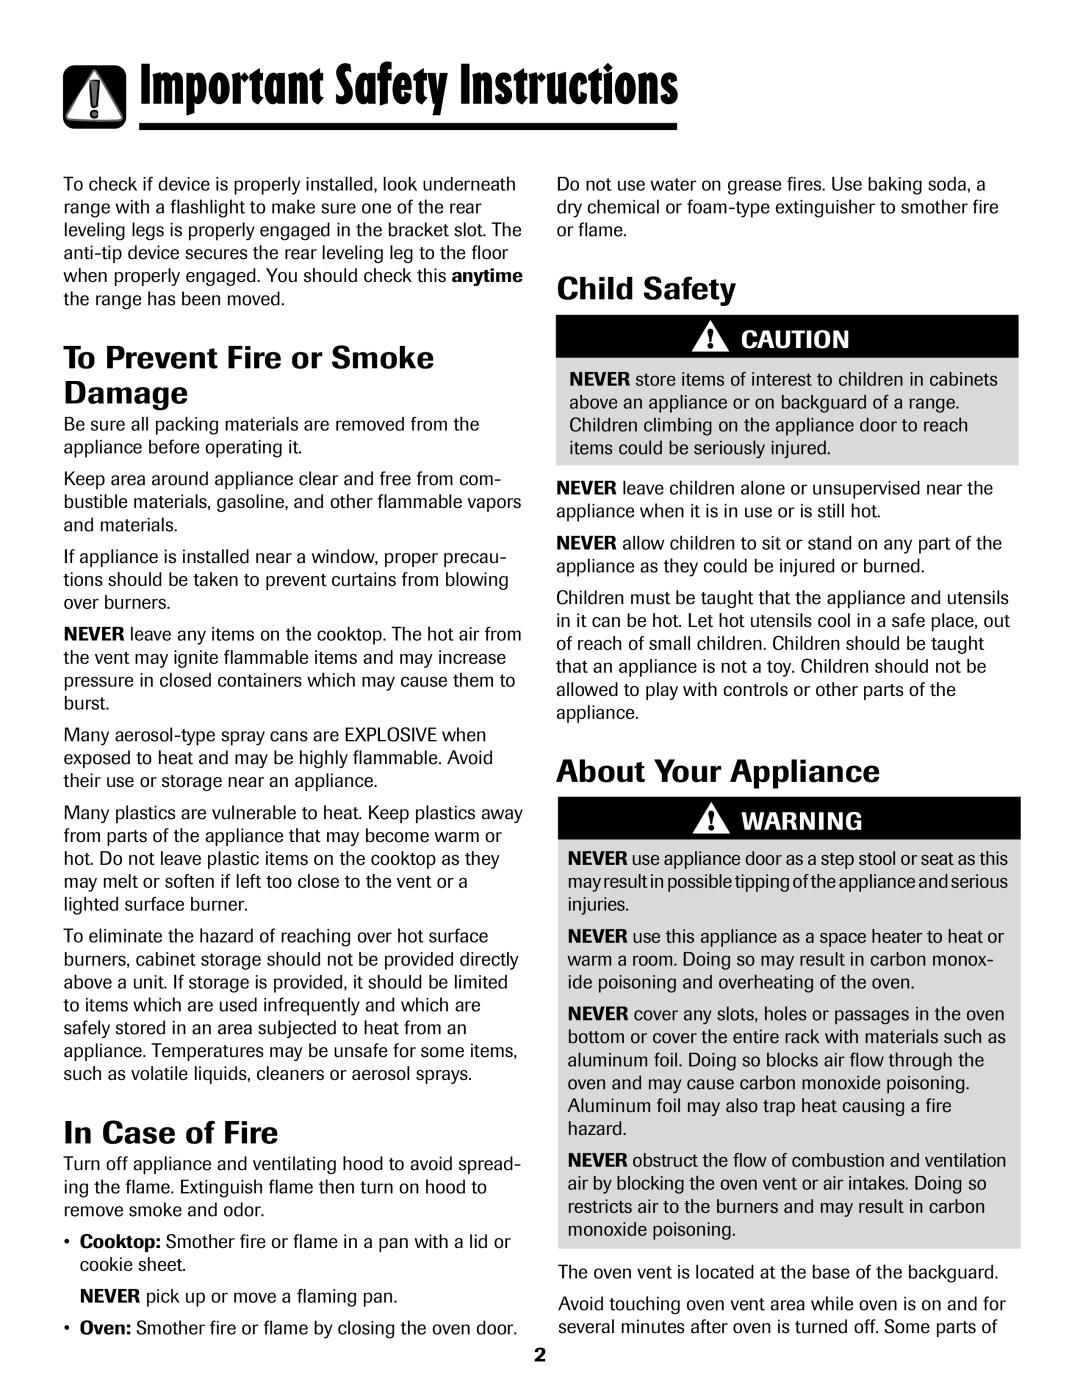 Maytag 700 manual Important Safety Instructions, To Prevent Fire or Smoke Damage, In Case of Fire, Child Safety 